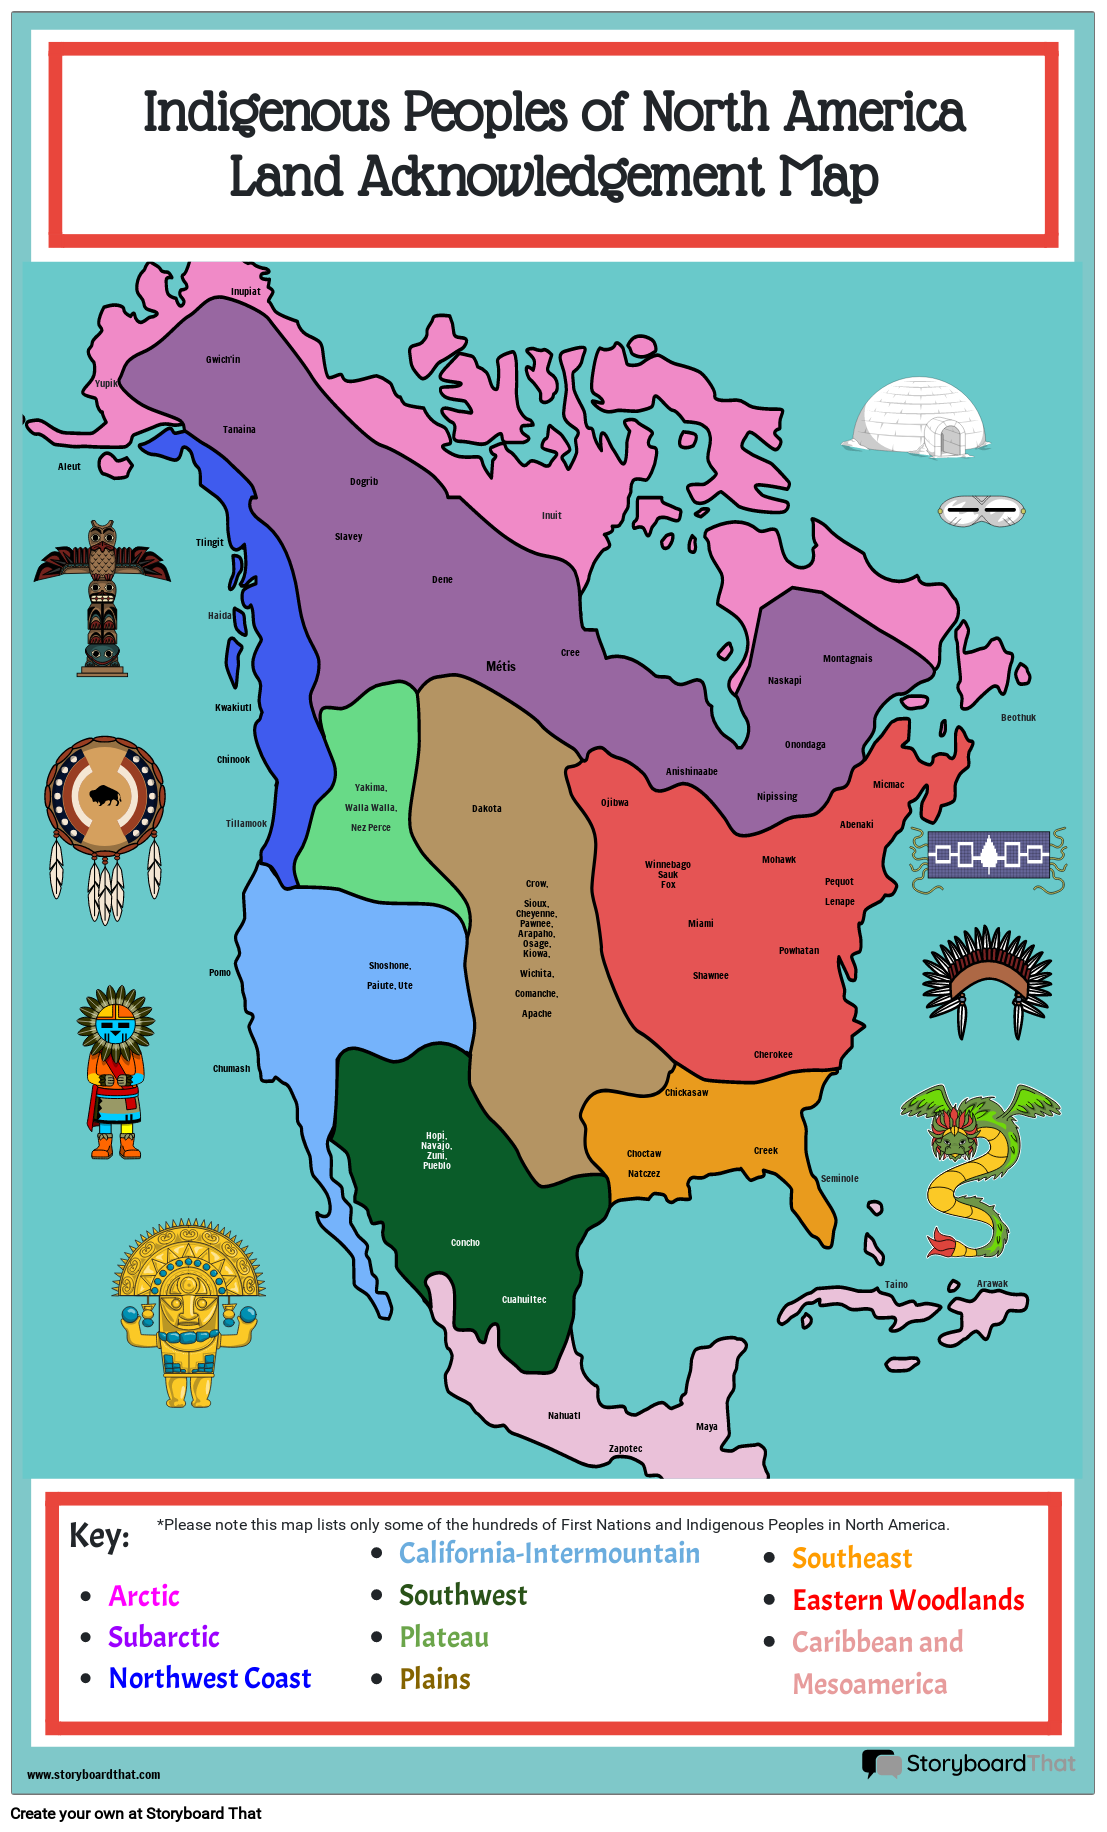 Indigenous Peoples of North America, Land Acknowledgement Map